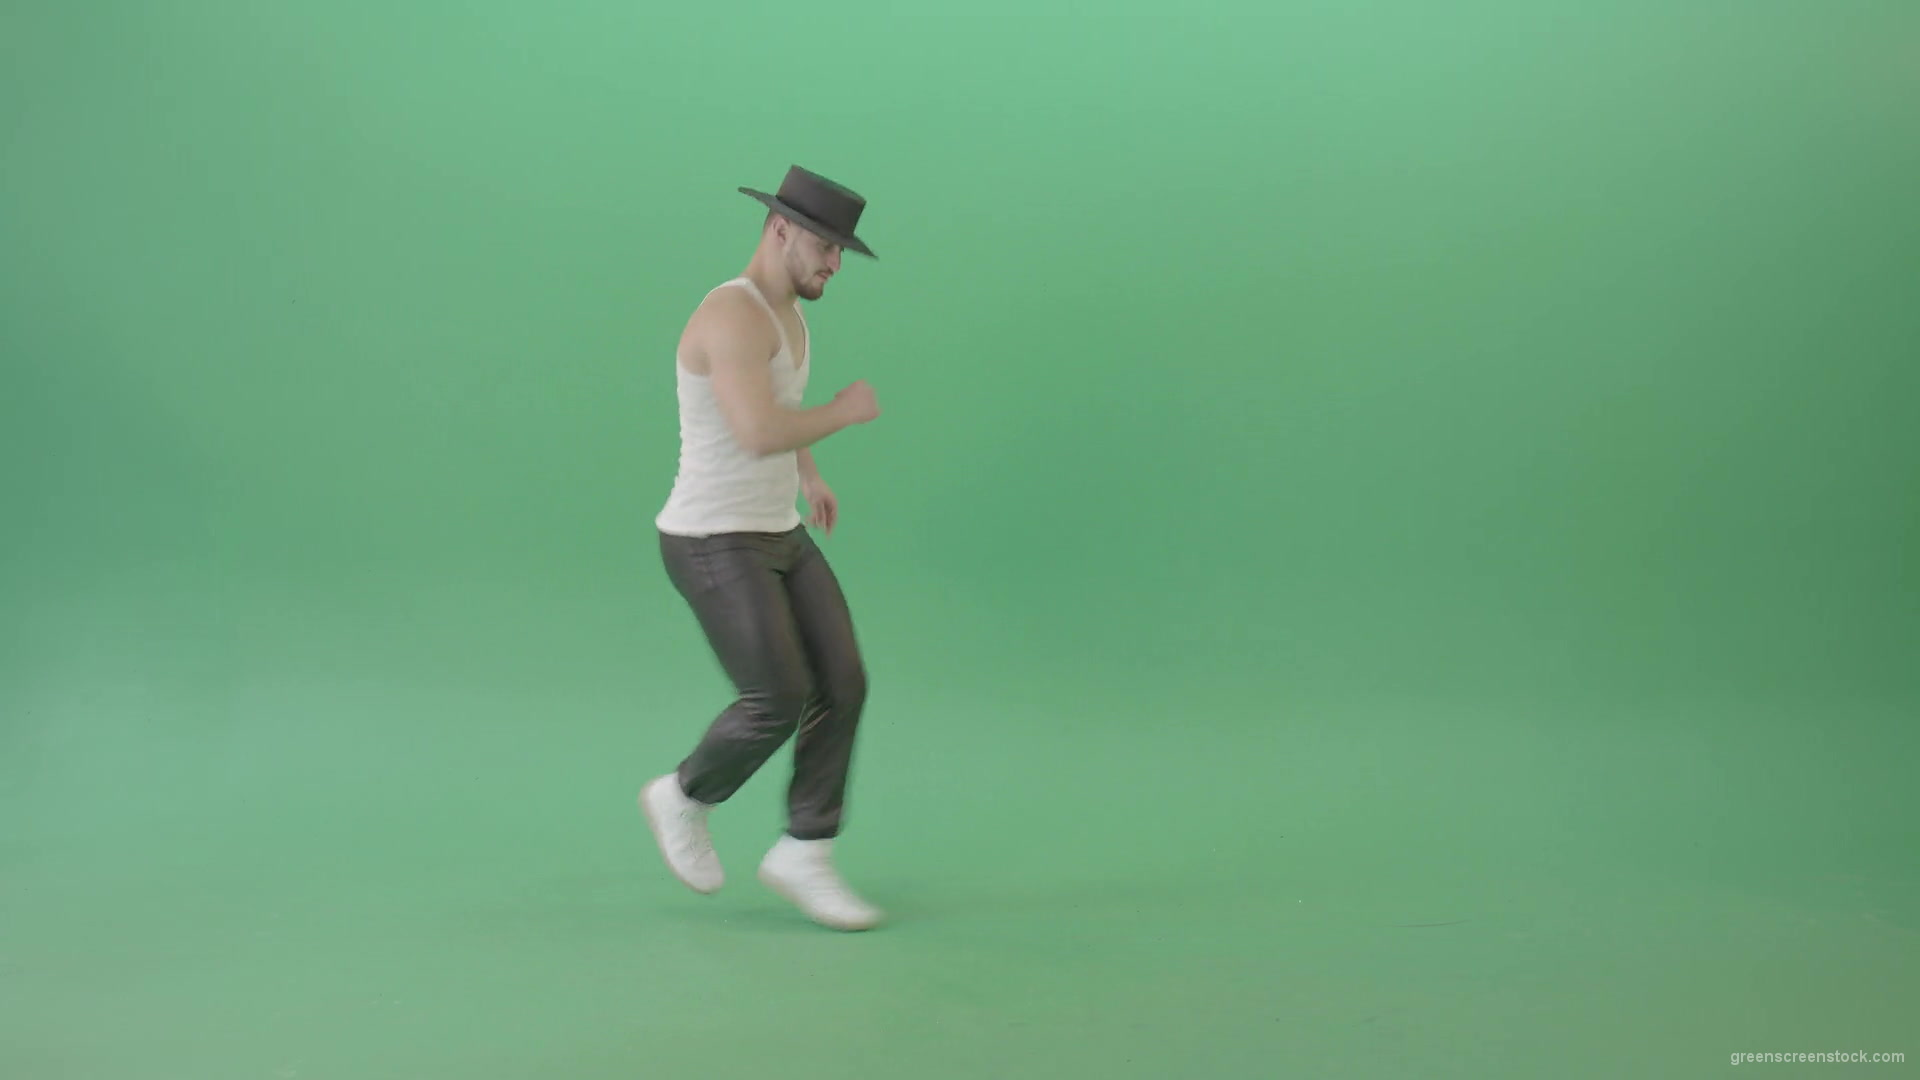 Adult-Man-makes-moonwalk-and-dancing-Pop-isolated-on-Green-Screen-4K-Video-Footage-1920_004 Green Screen Stock